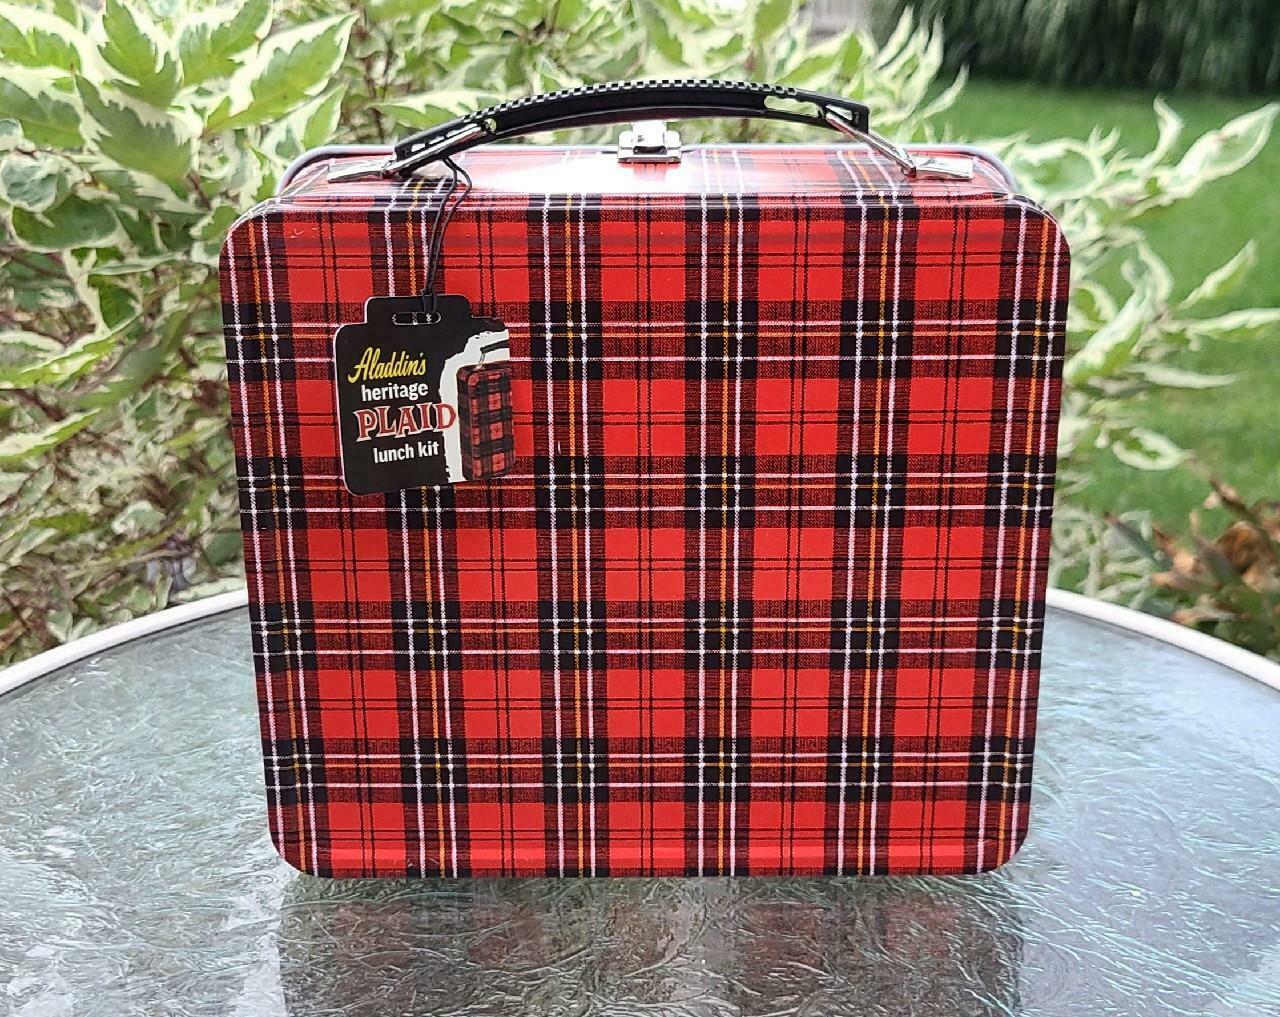 Nwt Aladdin Heritage Plaid Metal Lunchbox Kit With Accessories